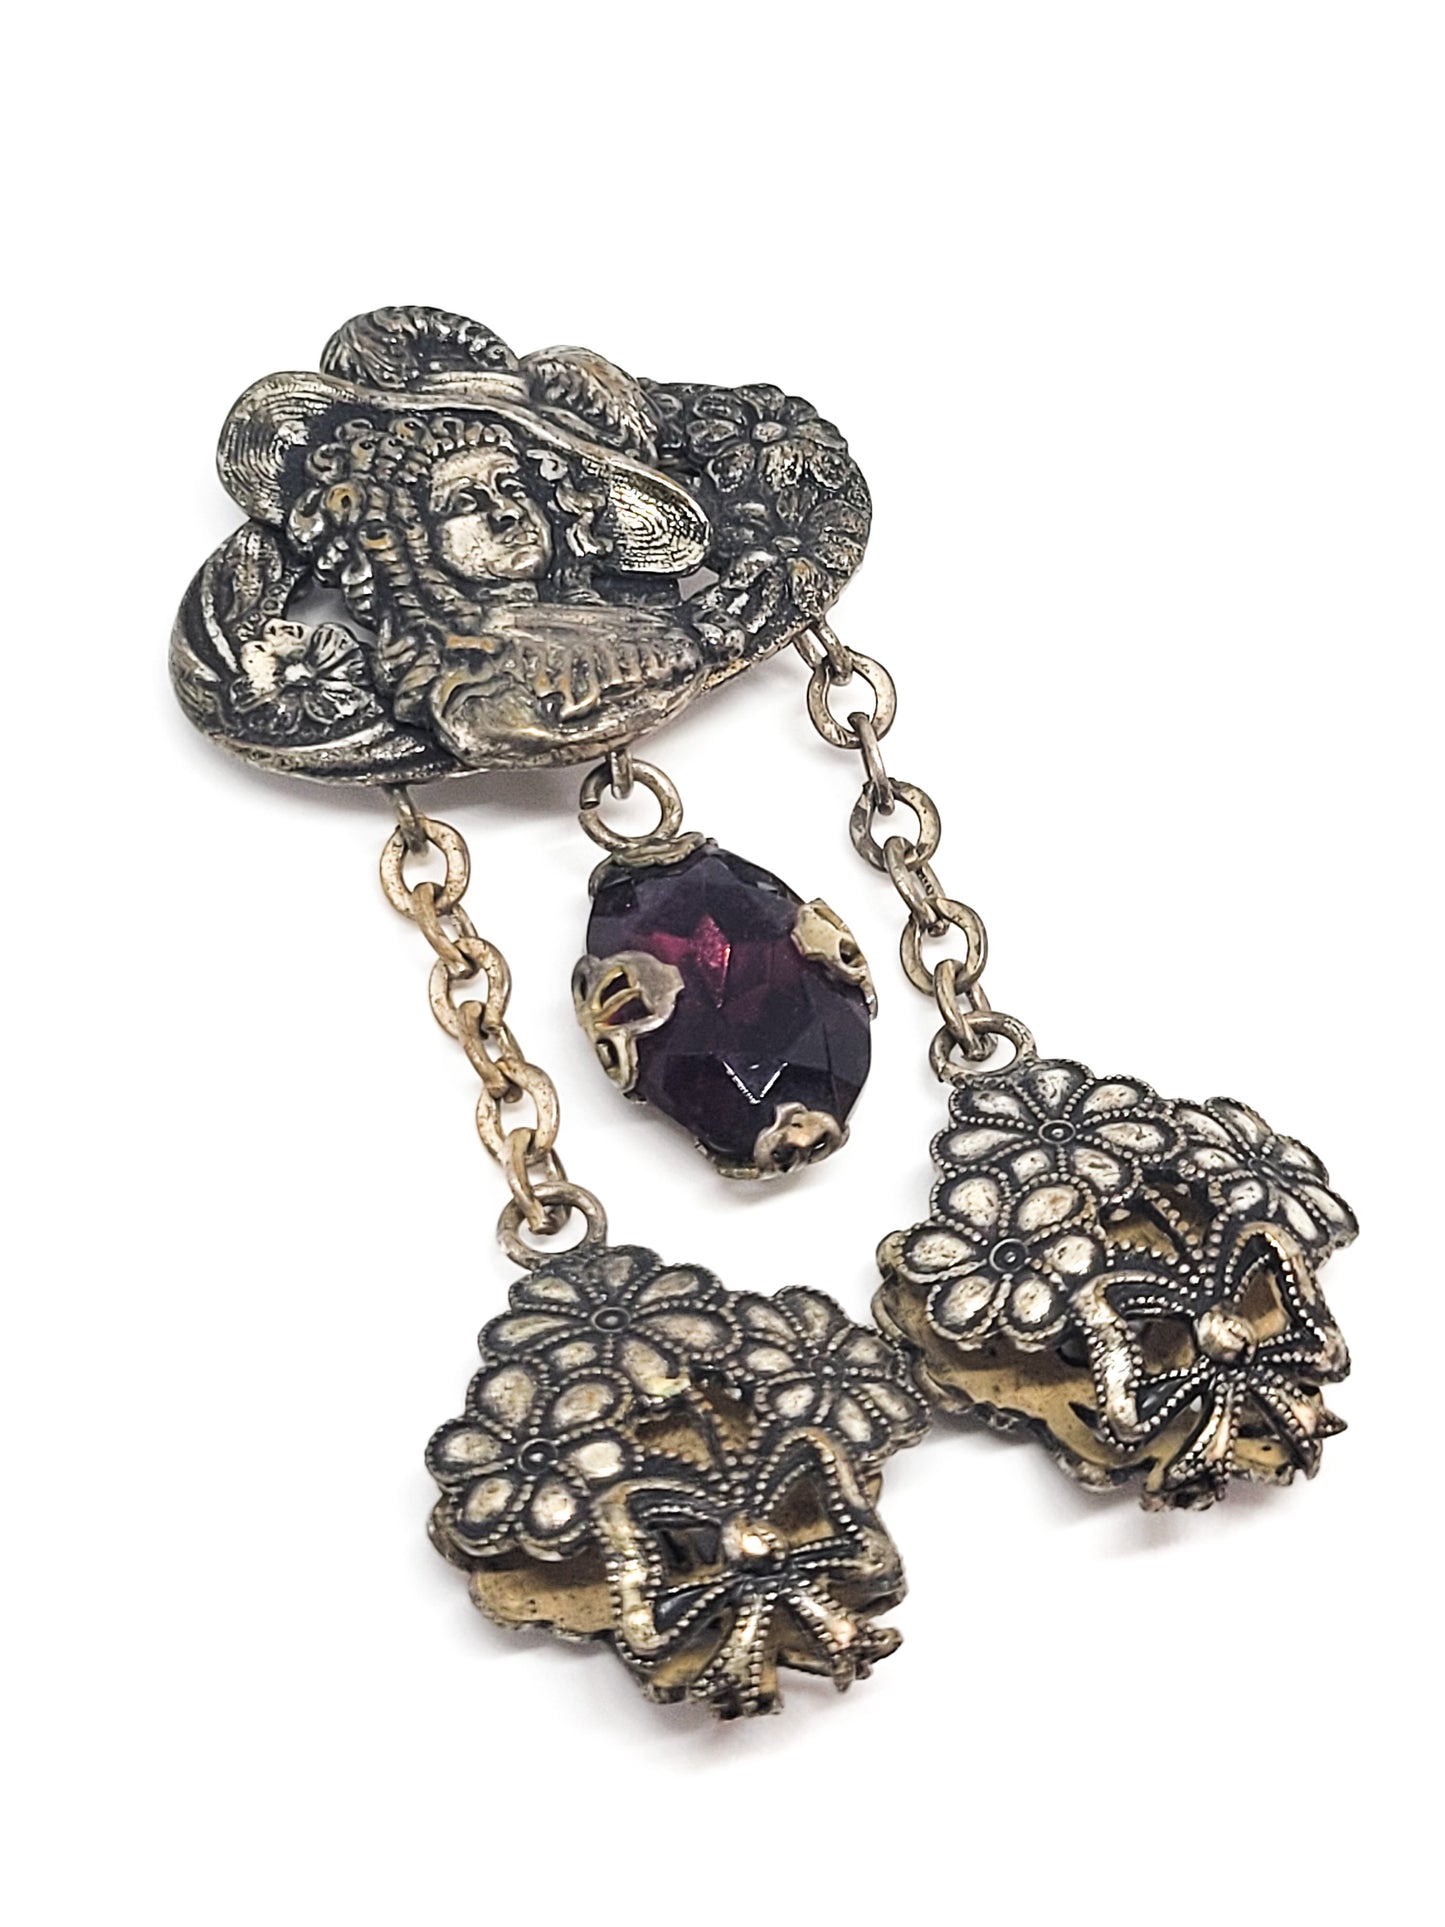 Art Nouveau Nymph lady in hat silver plated purple rhinestone chatelain brooch pin